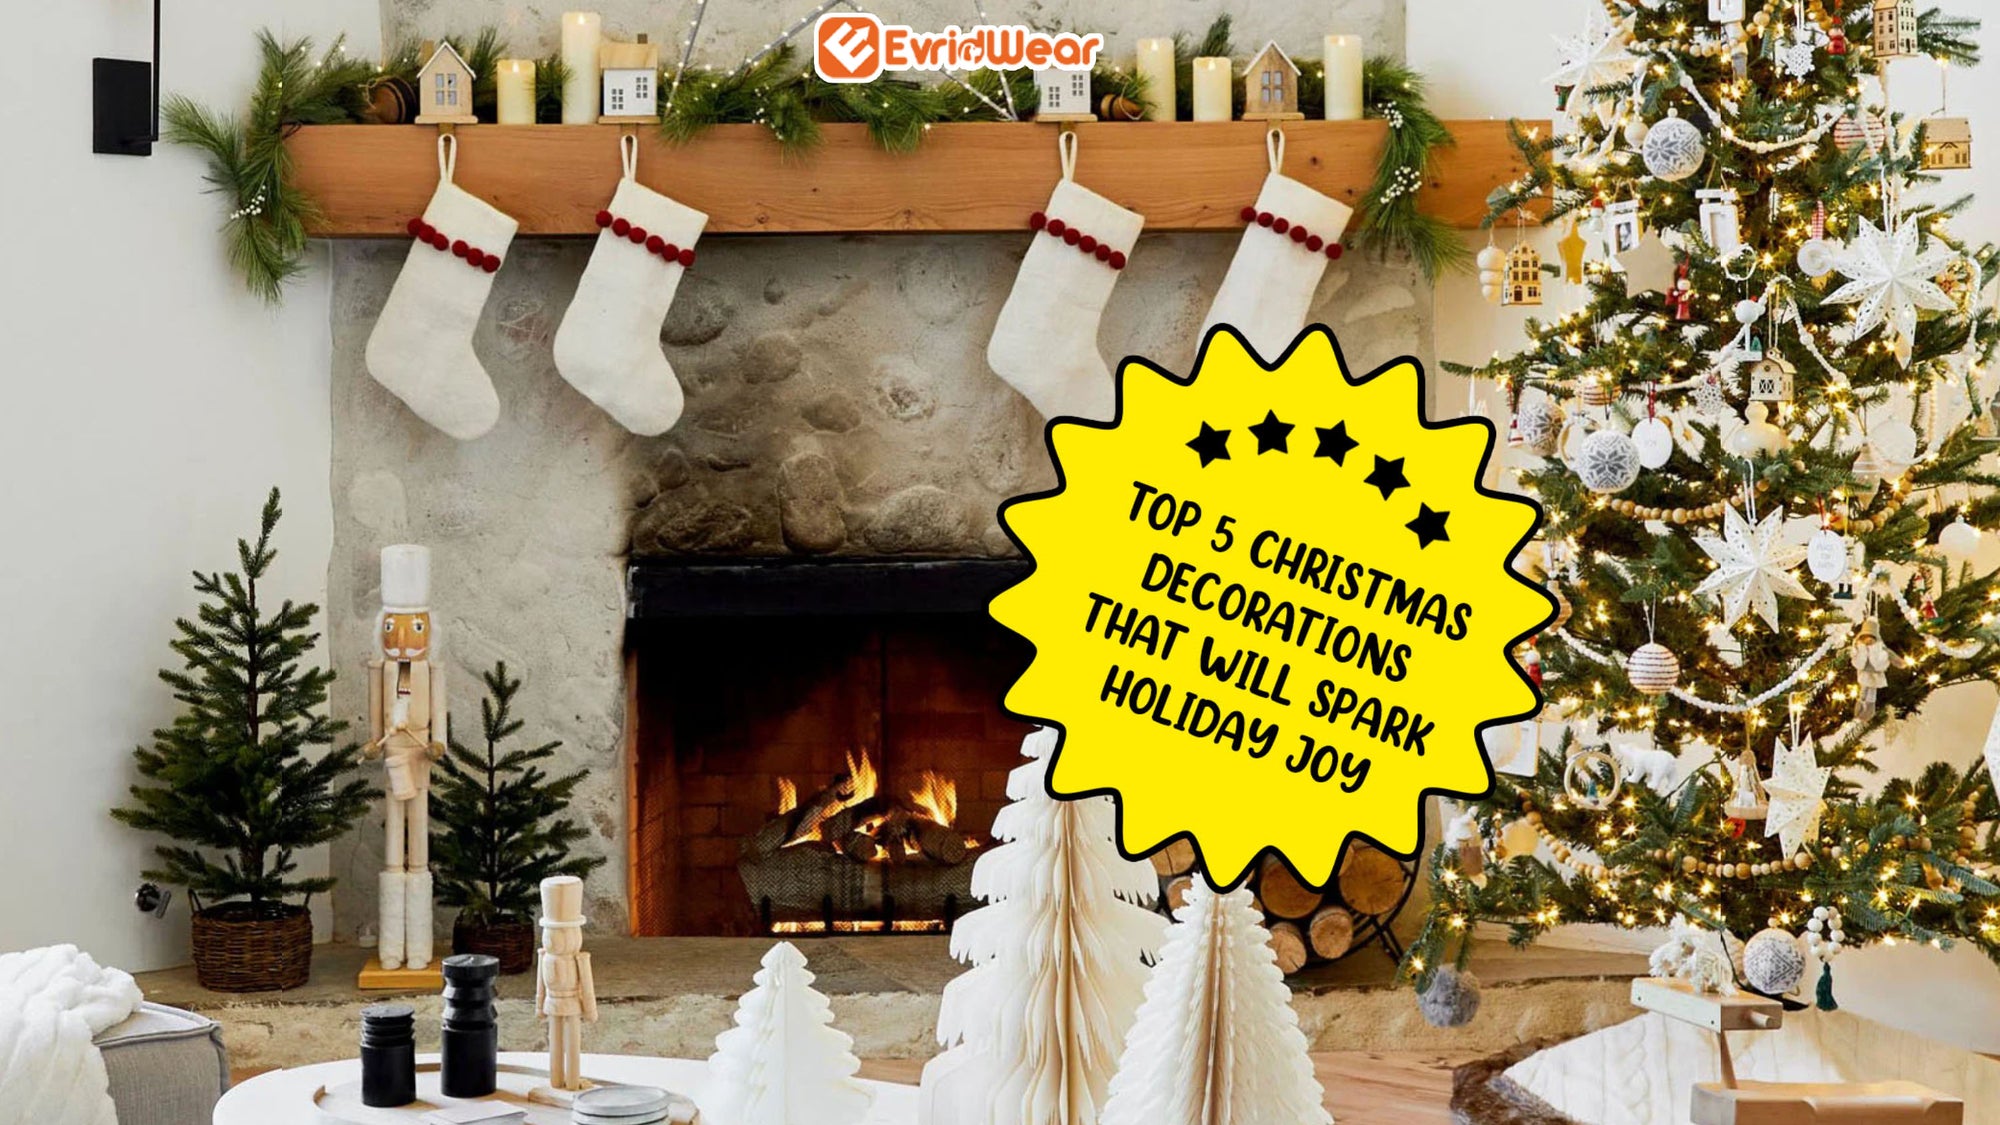 Deck the Halls: Top 5 Christmas Decorations That Will Spark Holiday Joy